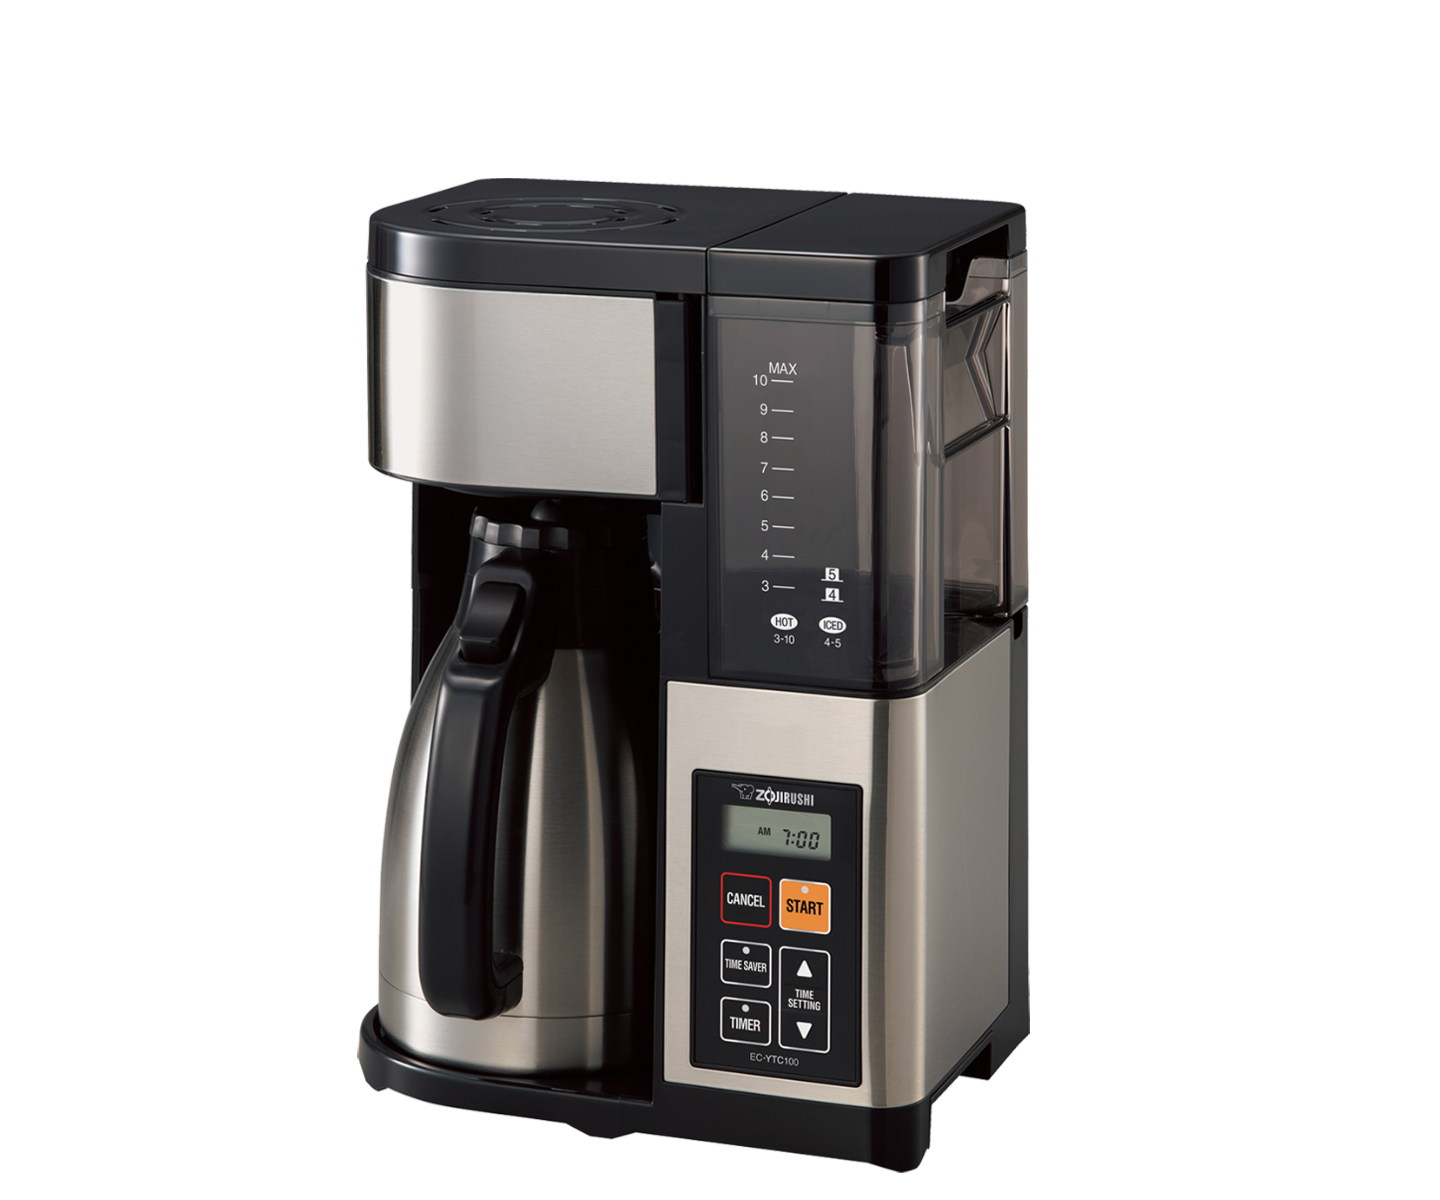 Mr. Coffee 10-Cup Programmable Coffeemaker with Thermal Carafe